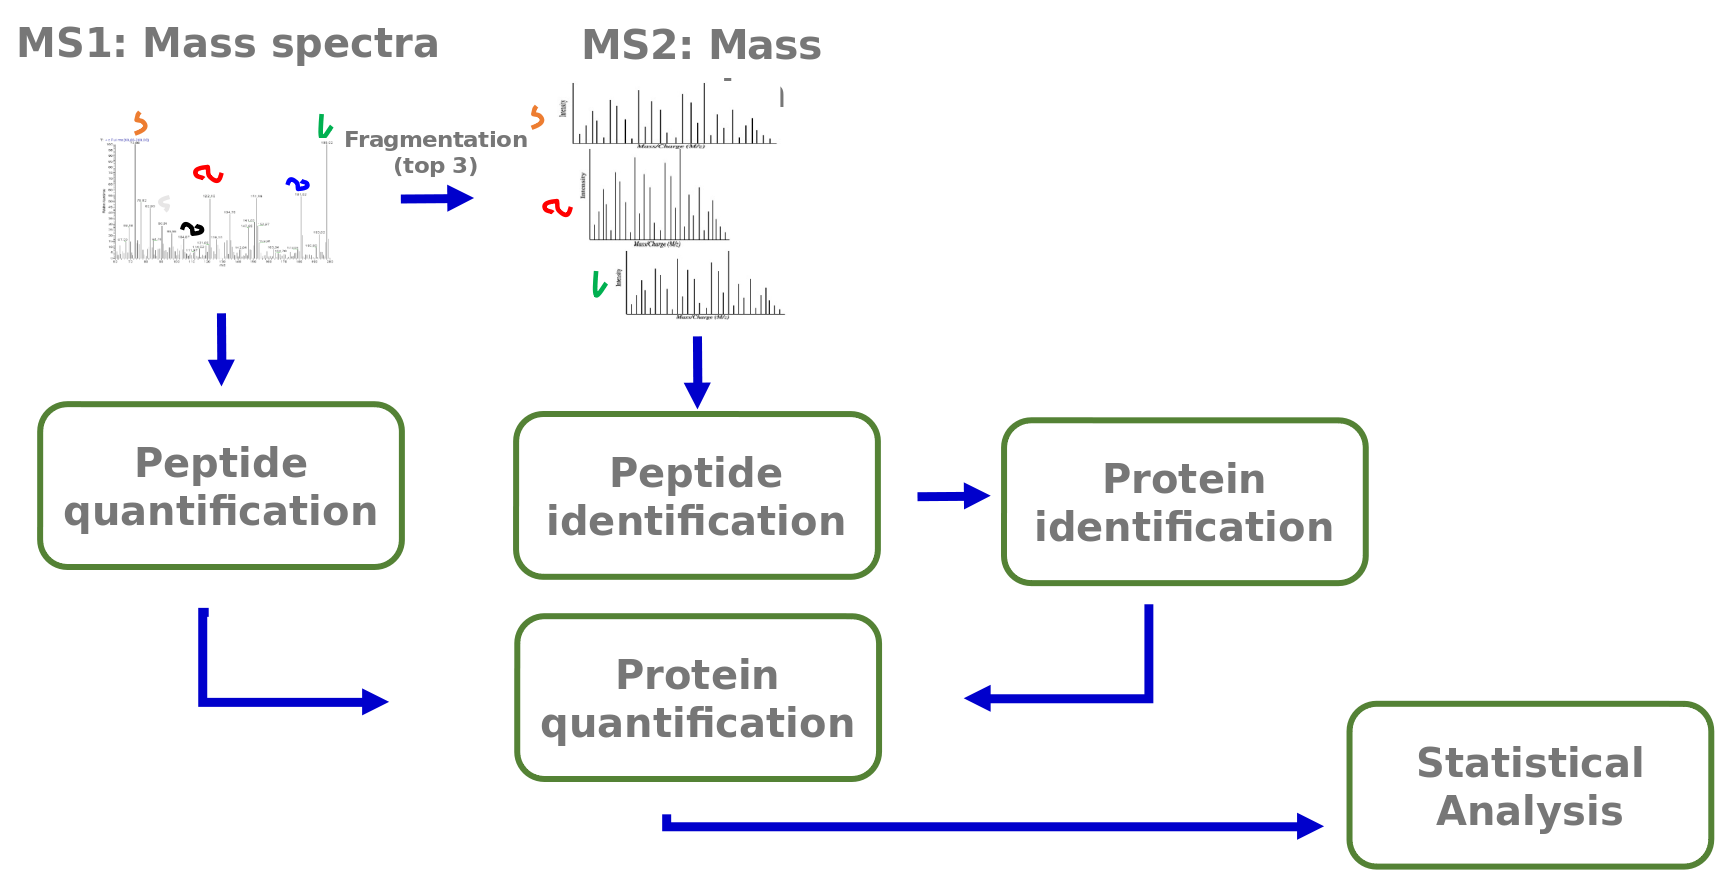 the MS1 and MS2 mass spectra go into this workflow. The ms1 goes through peptide quantification. the MS2 goes through peptide identification and then protein identification. everything goes to protein quantification and statitstical analysis.